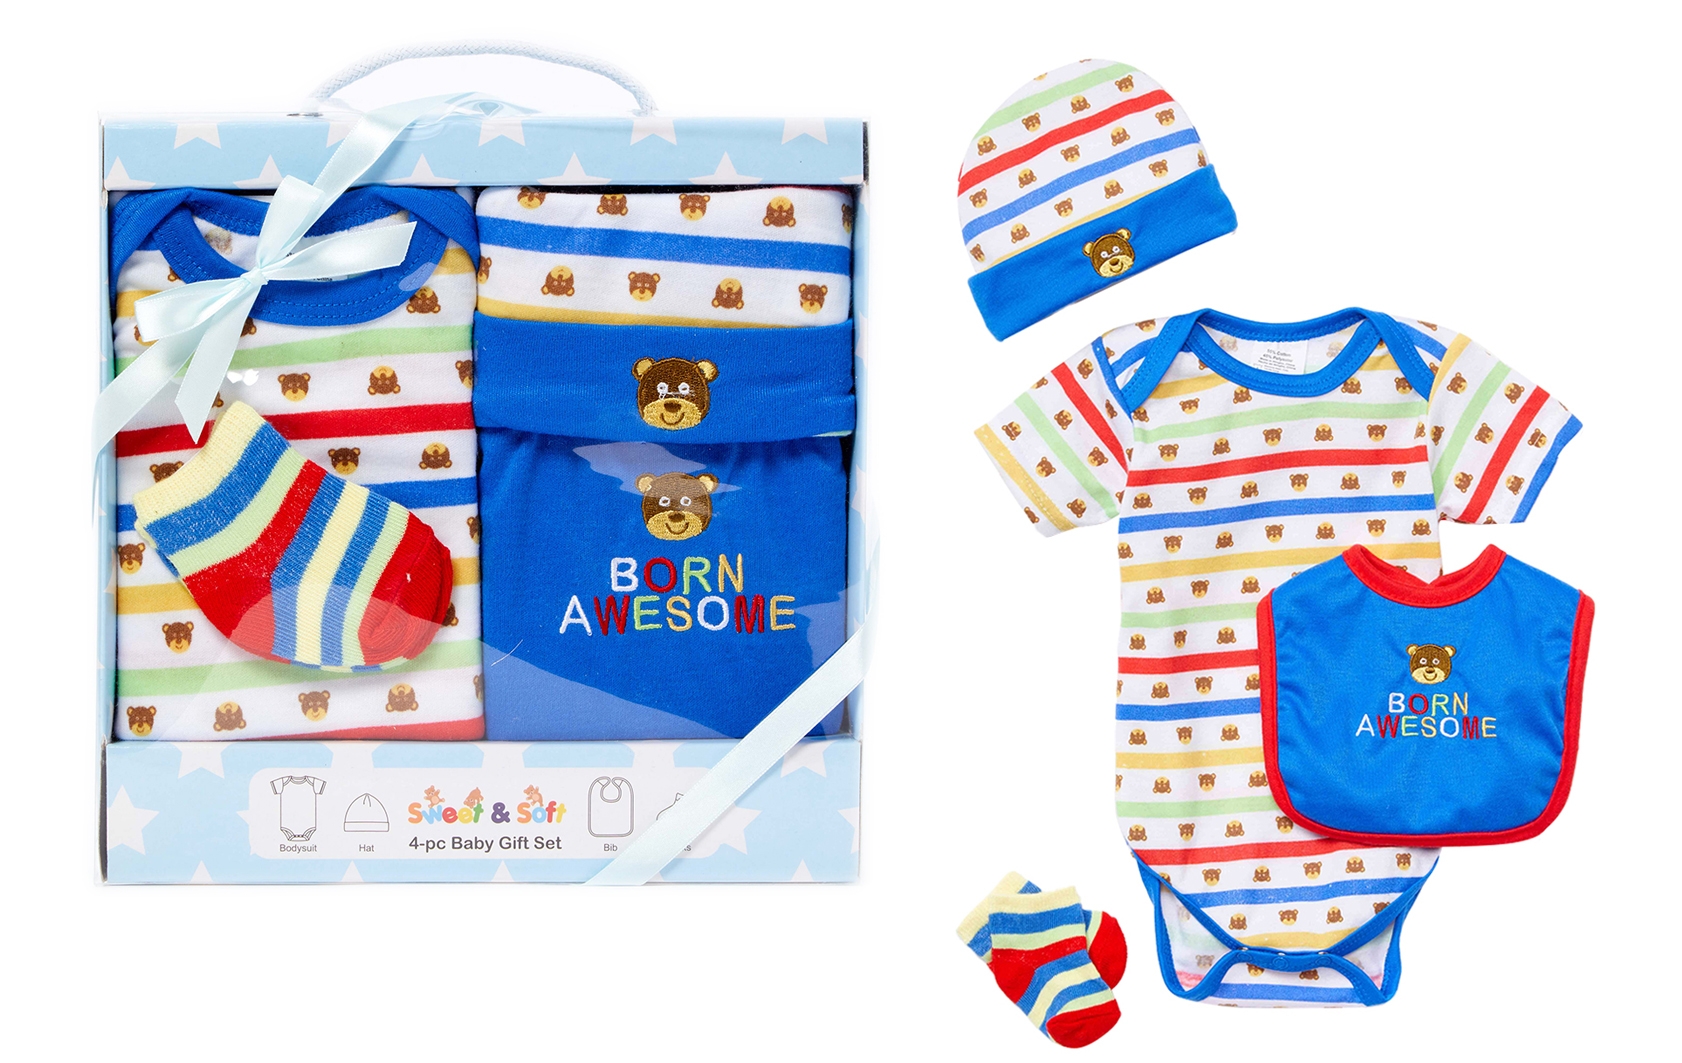 4 PC. Unisex Baby Gift Box Sets w/ Embroidered Bear & Born Awesome Print